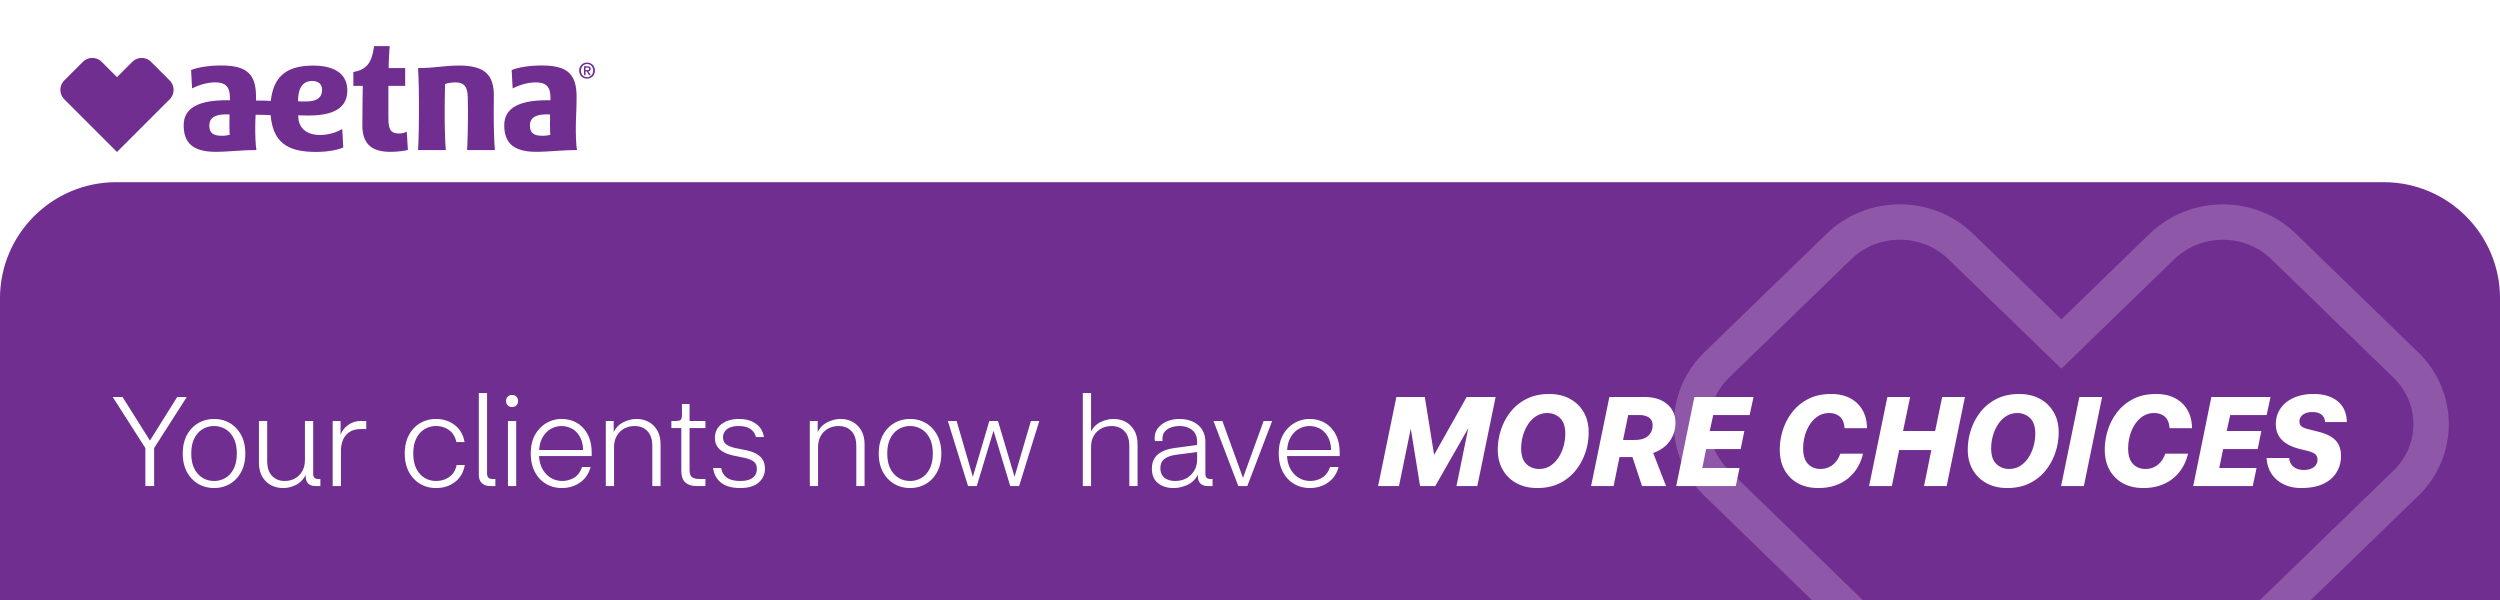 Aetna Recovery Care Updates banner